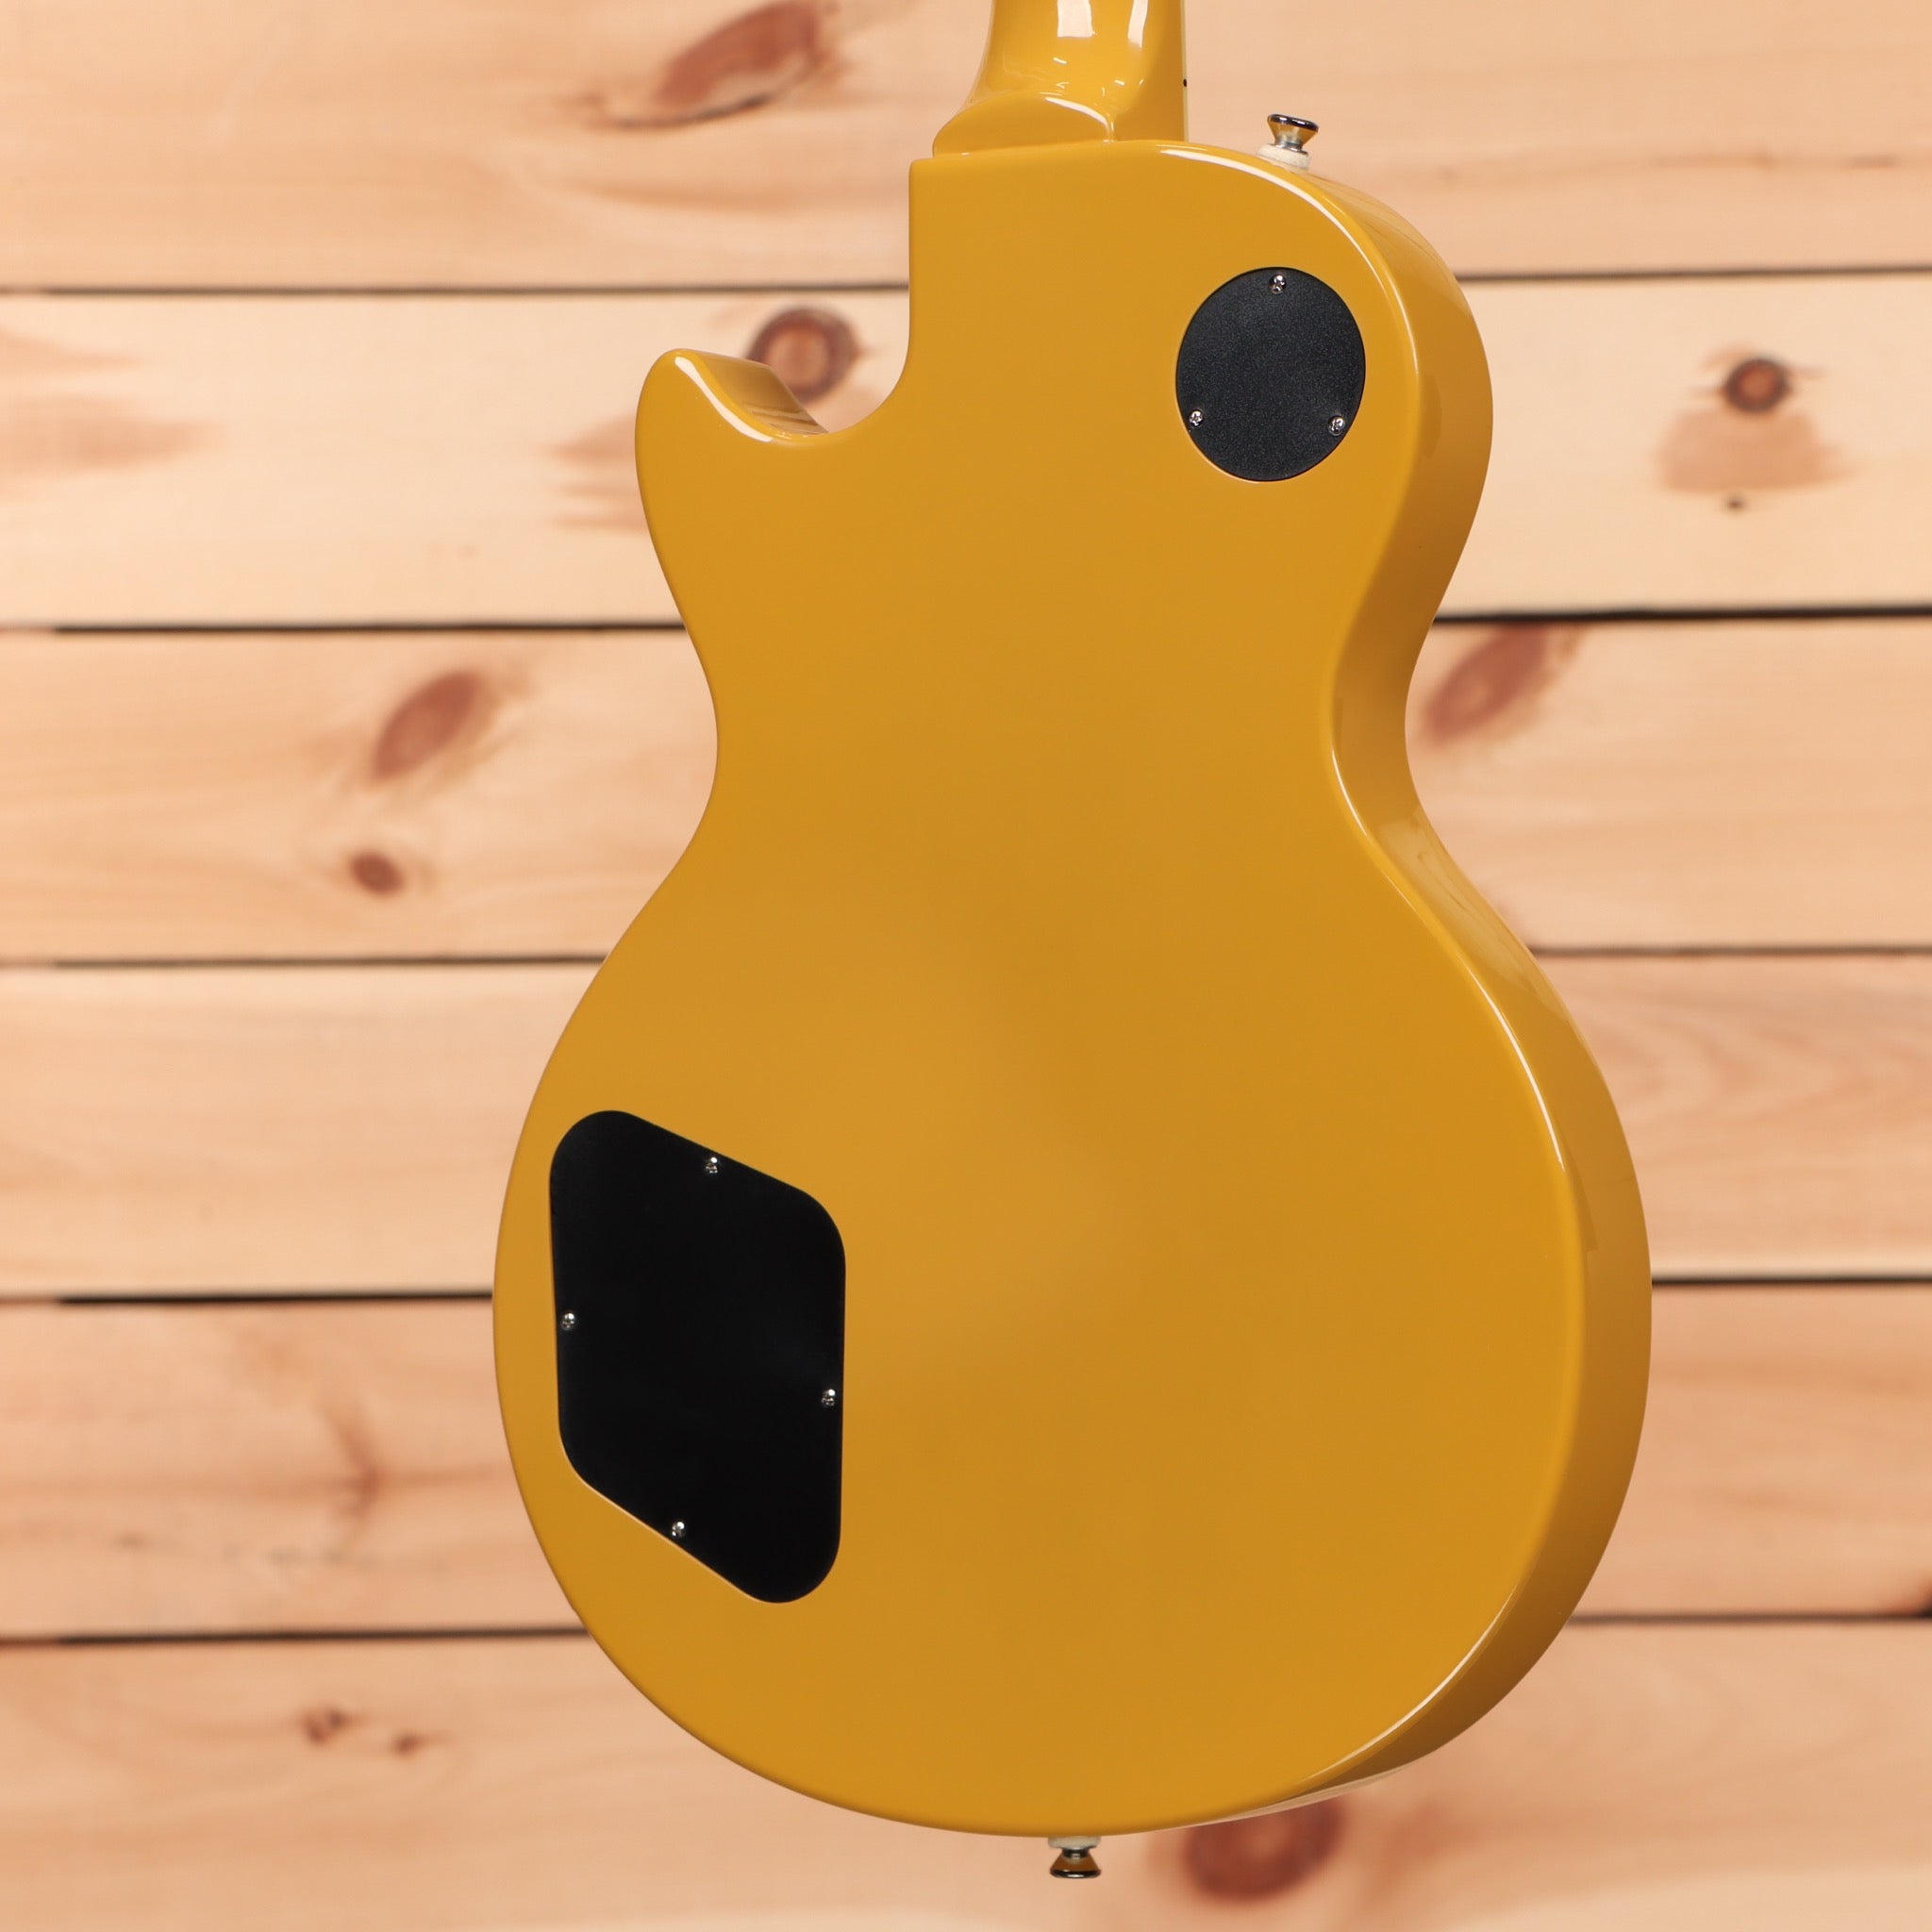 Epiphone Les Paul Special - TV Yellow